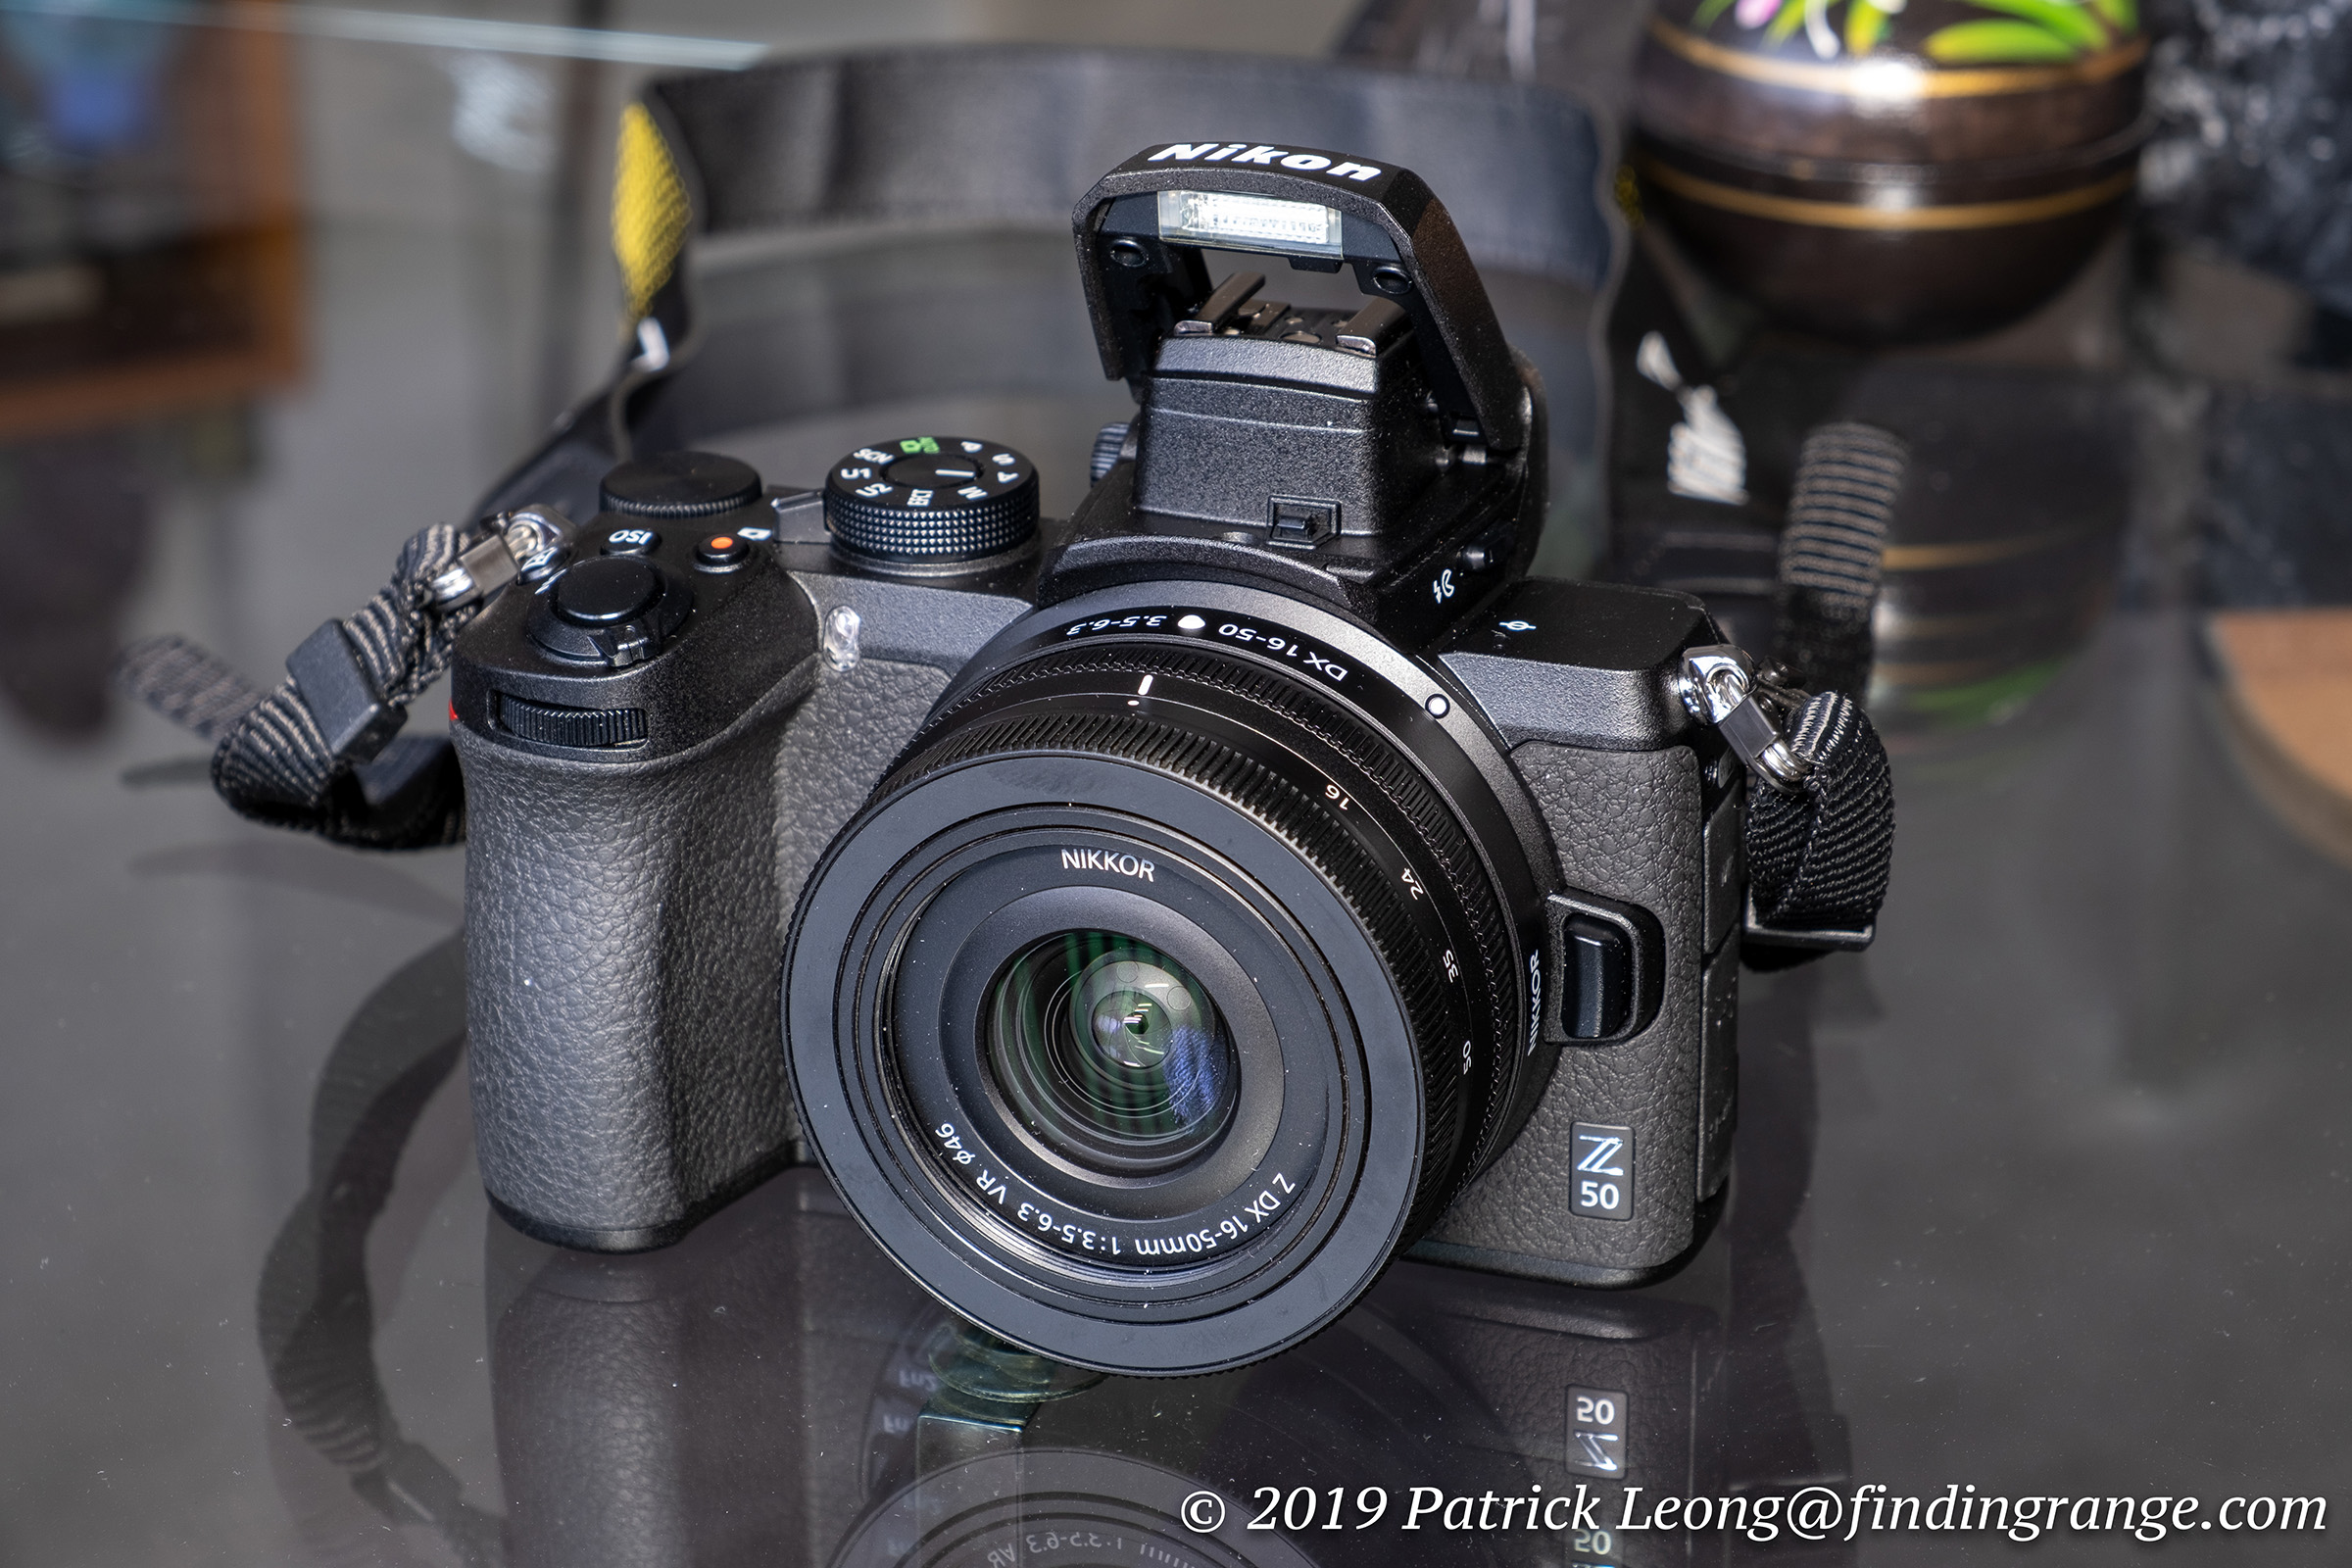 Nikon Z50 review: An impressive mirrorless camera for content